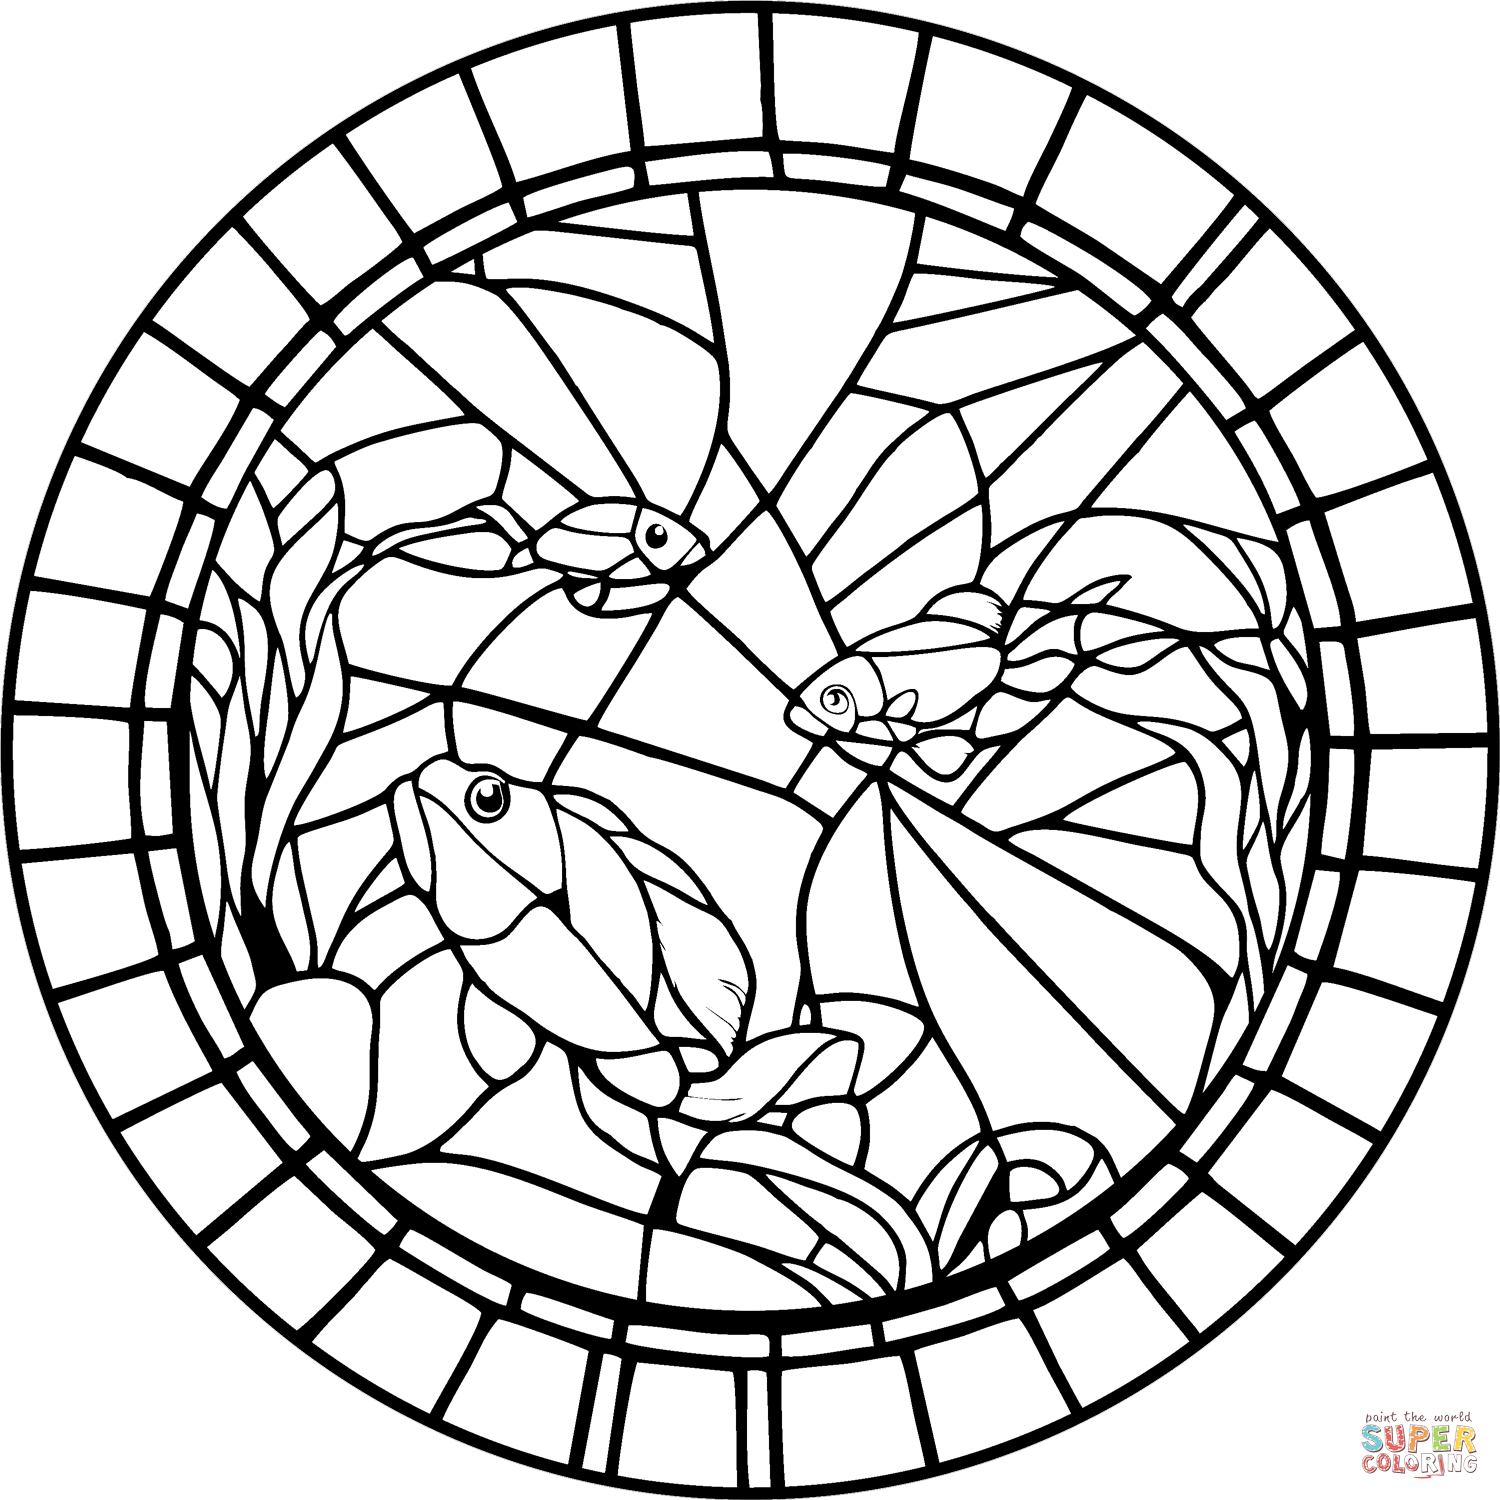 Fish stained glass coloring page free printable coloring pages